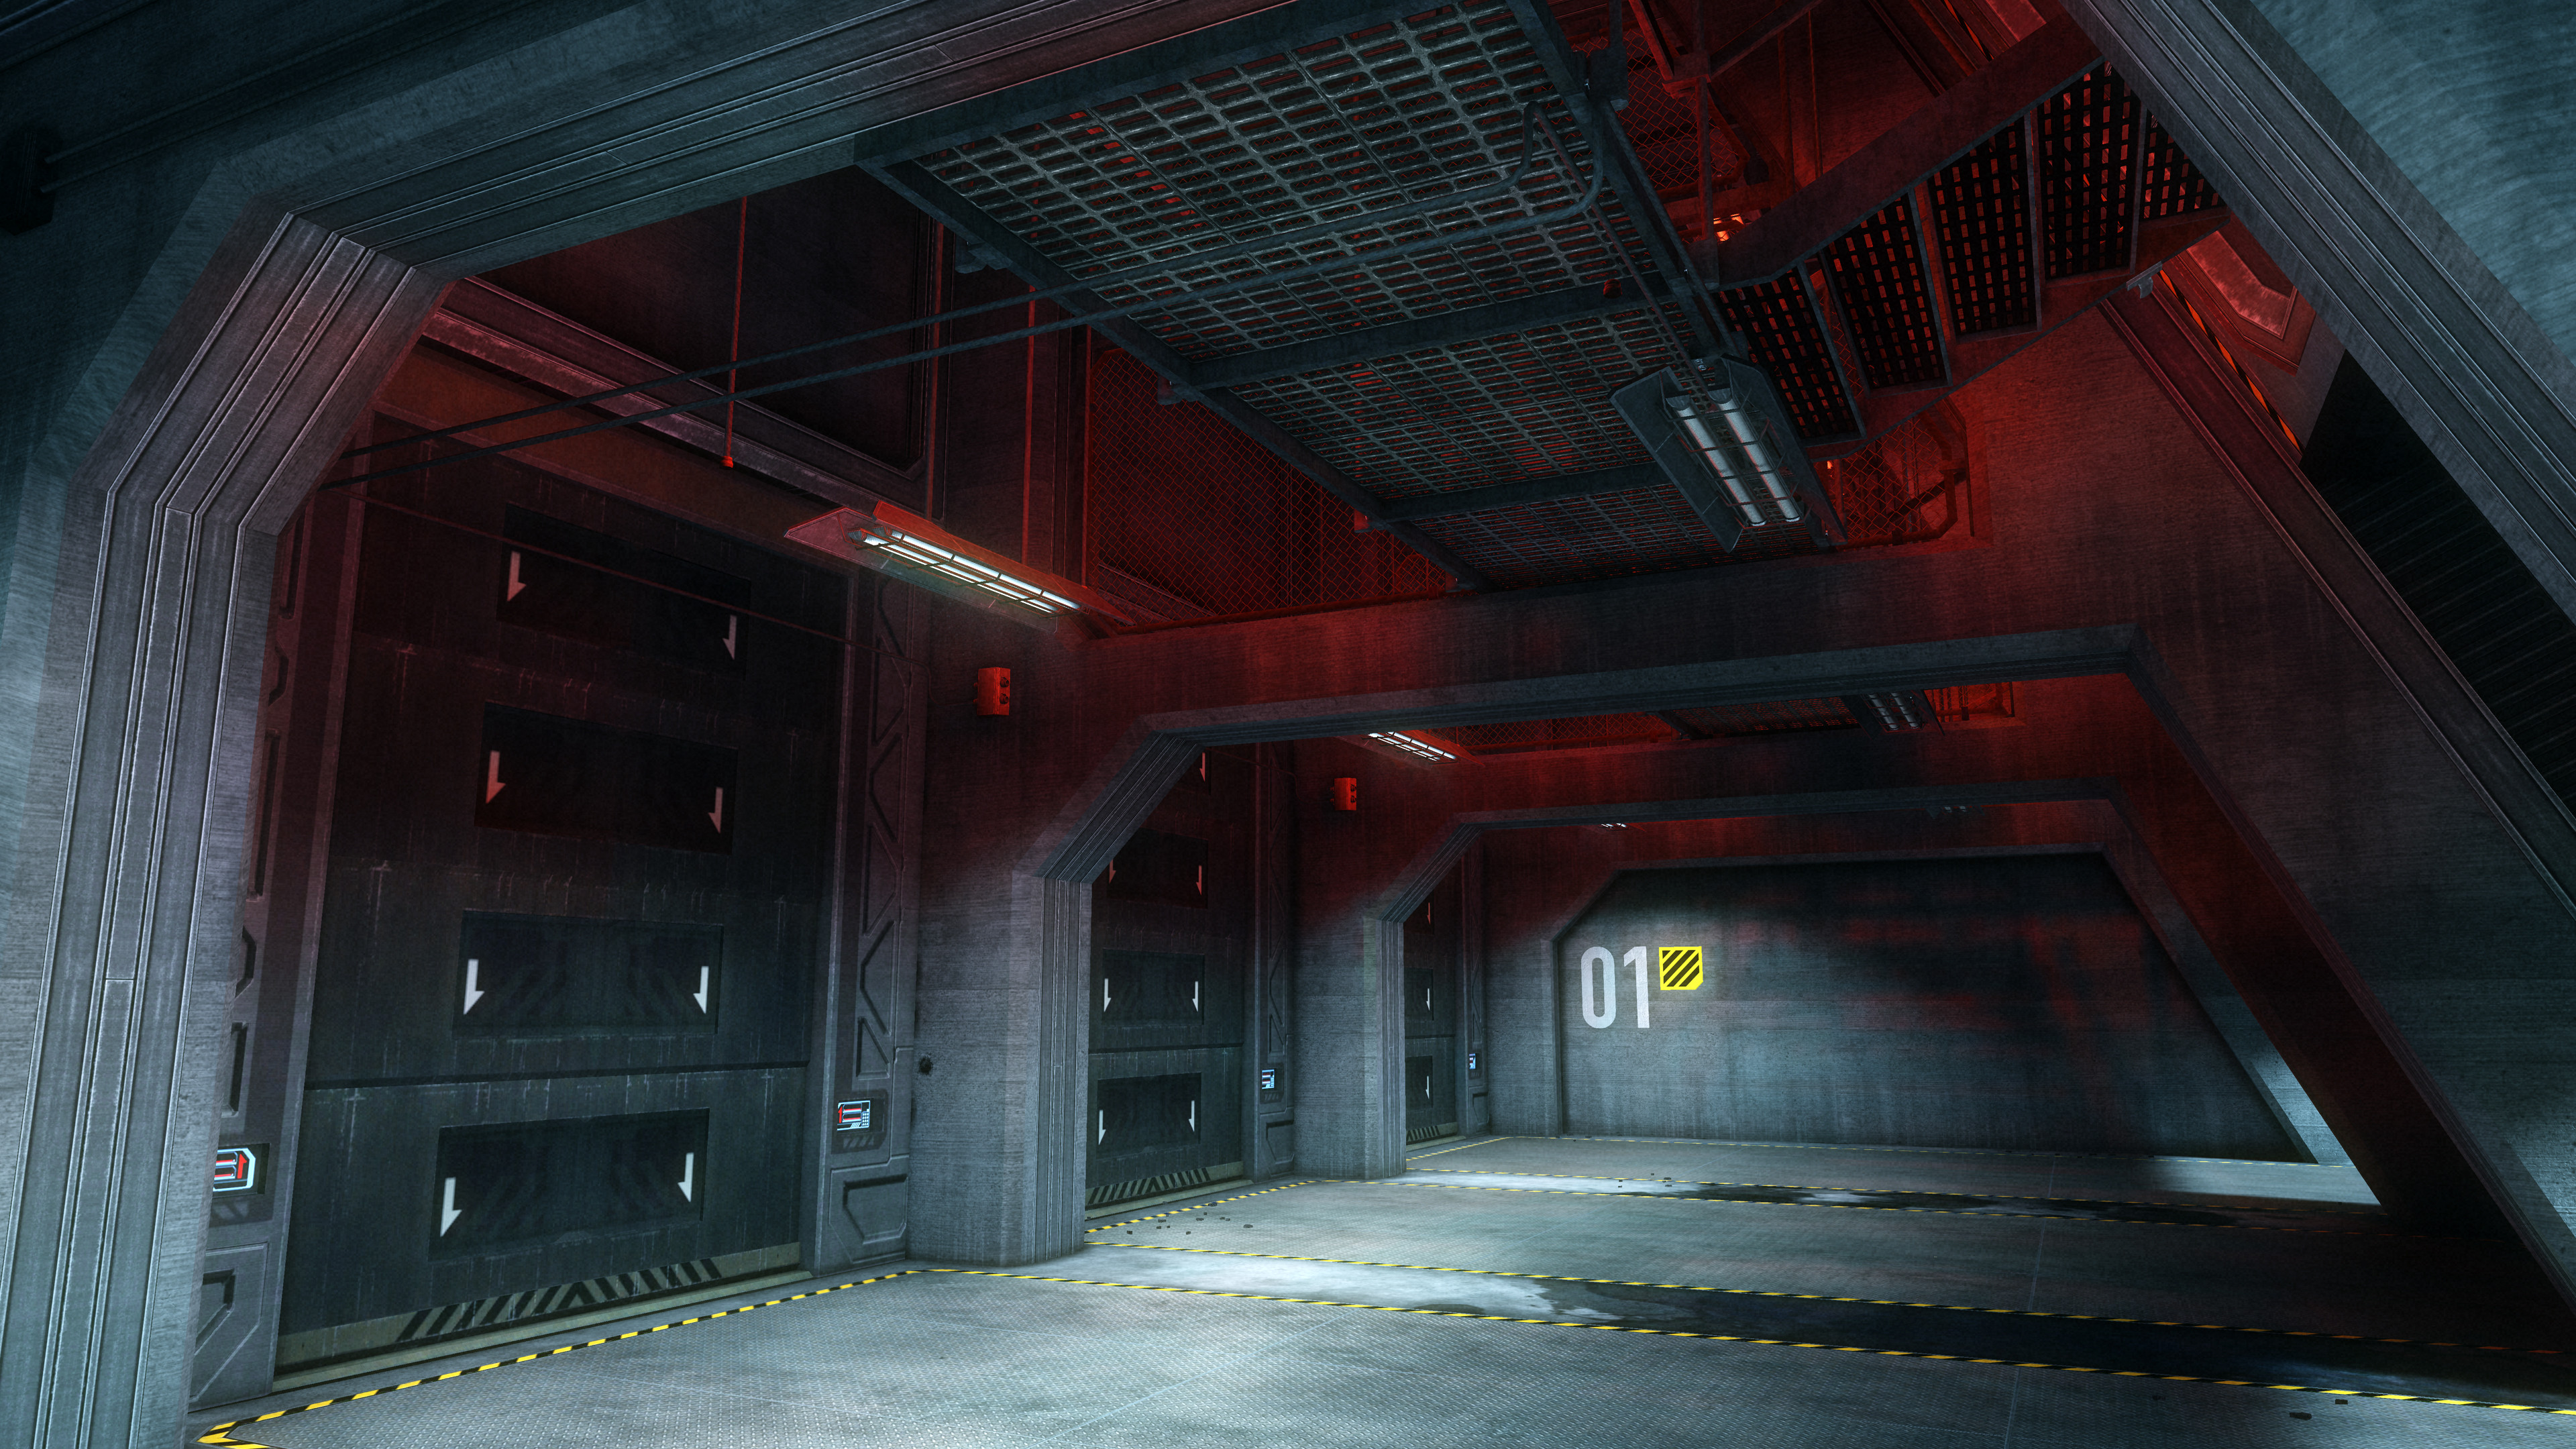 Halo Reach - UNSC Outpost
Hard surface geometry, materials, and lighting. - 2010
Door by another artist.